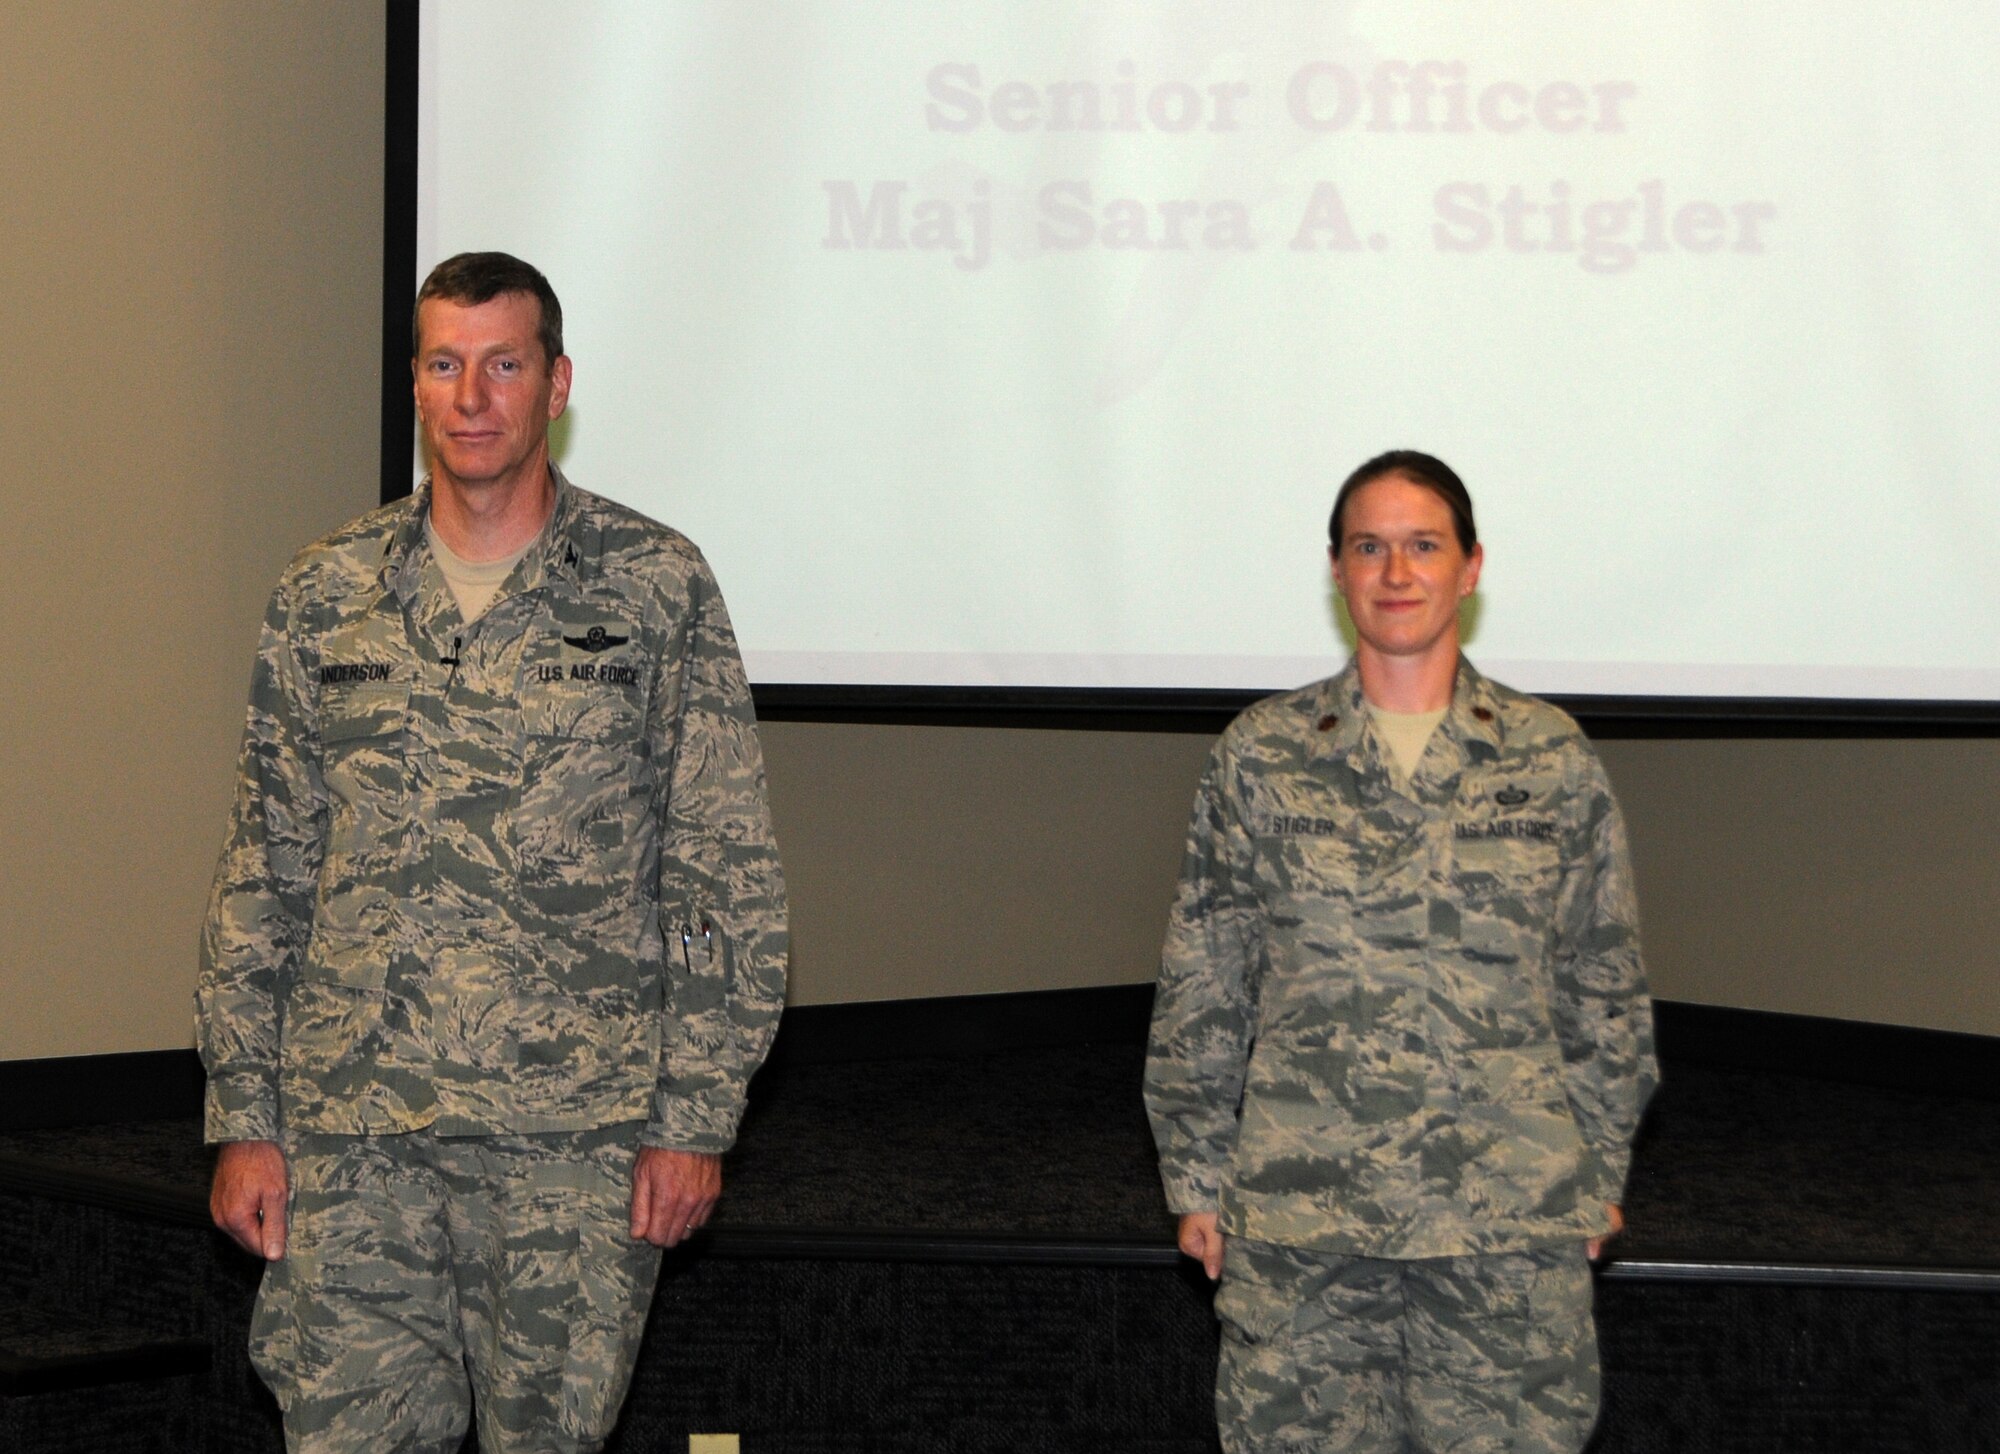 Maj. Sara Stigler, right, was the winner of the wing level Lance P. Sijan Leadership Award at the 188th Fighter Wing in the senior officer category. Col. Mark W. Anderson, 188th Fighter Wing commander, recognized Stigler for this accolade at a recent commander’s call Sept. 7, 2013. (U.S. Air National Guard photo by Airman 1st Class Cody Martin/188th Fighter Wing Public Affairs)